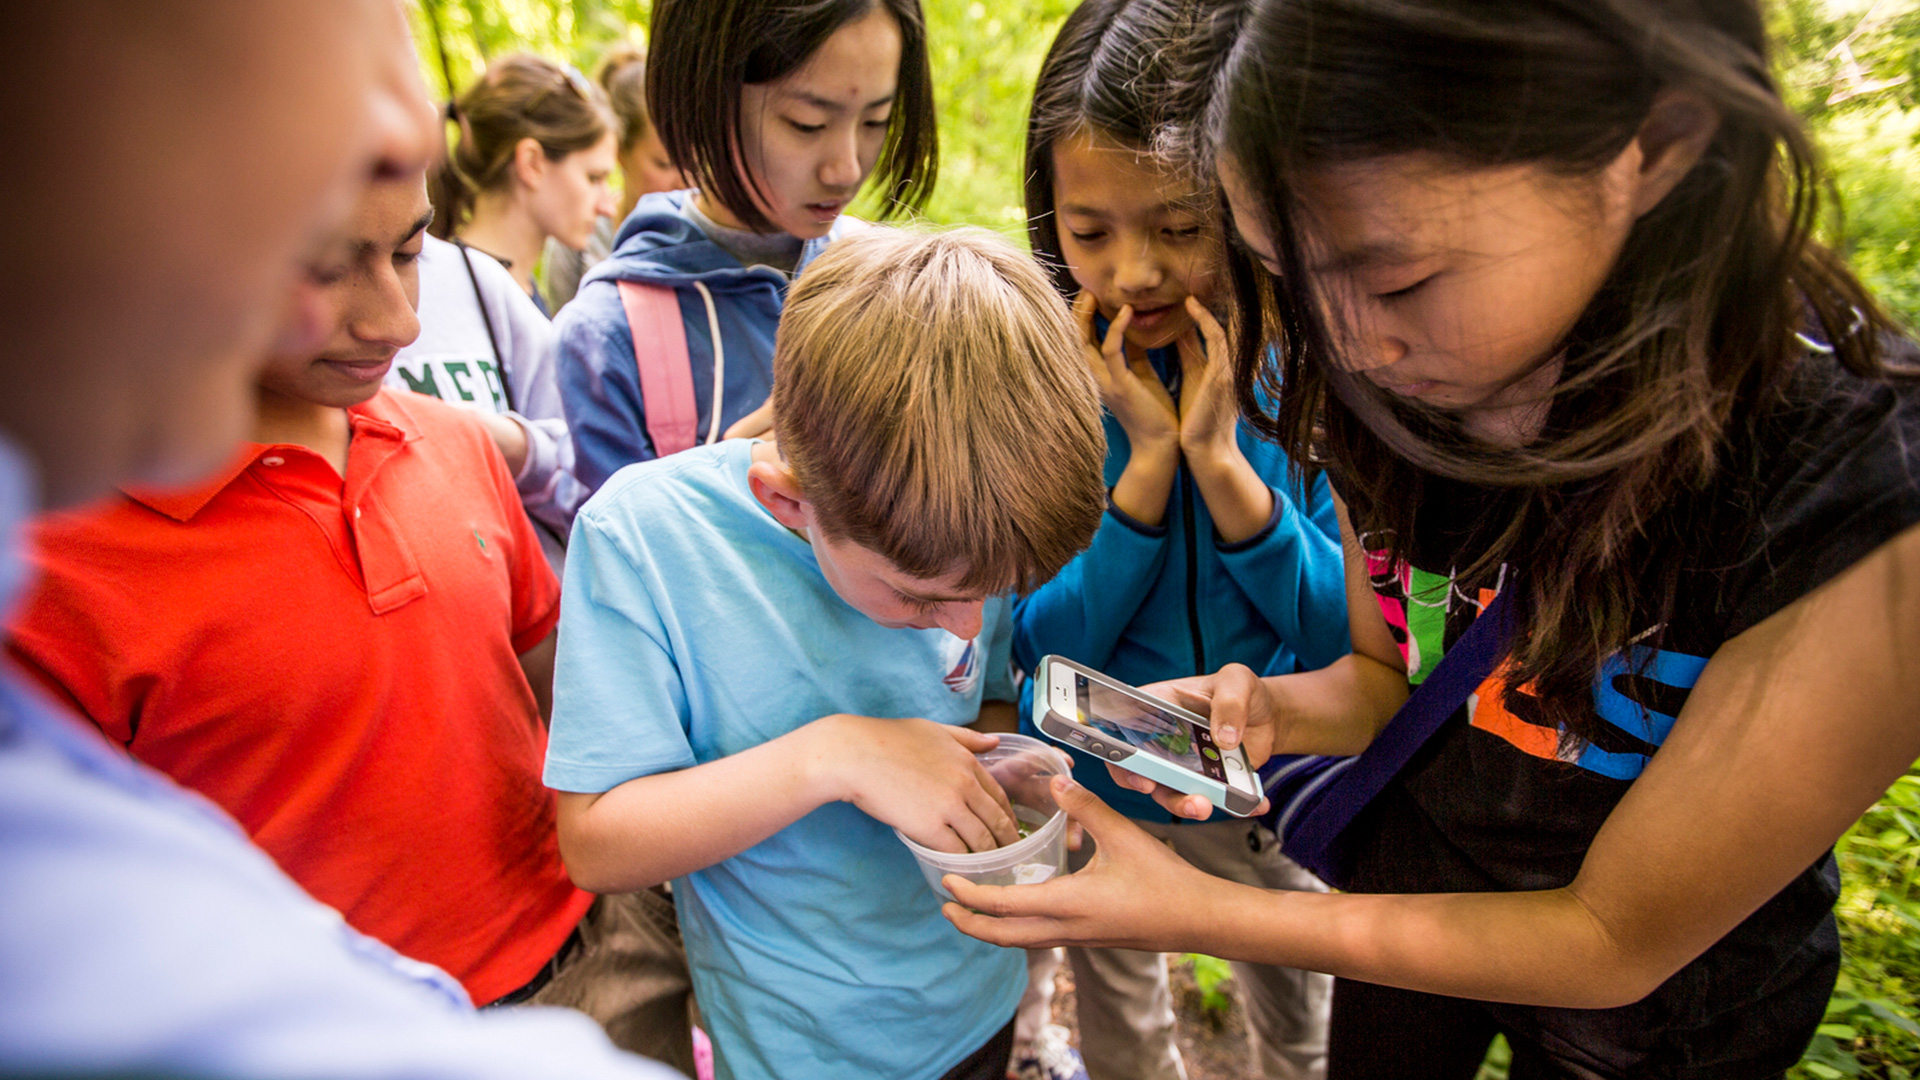 Kids gather around a specimen collected from a creek.